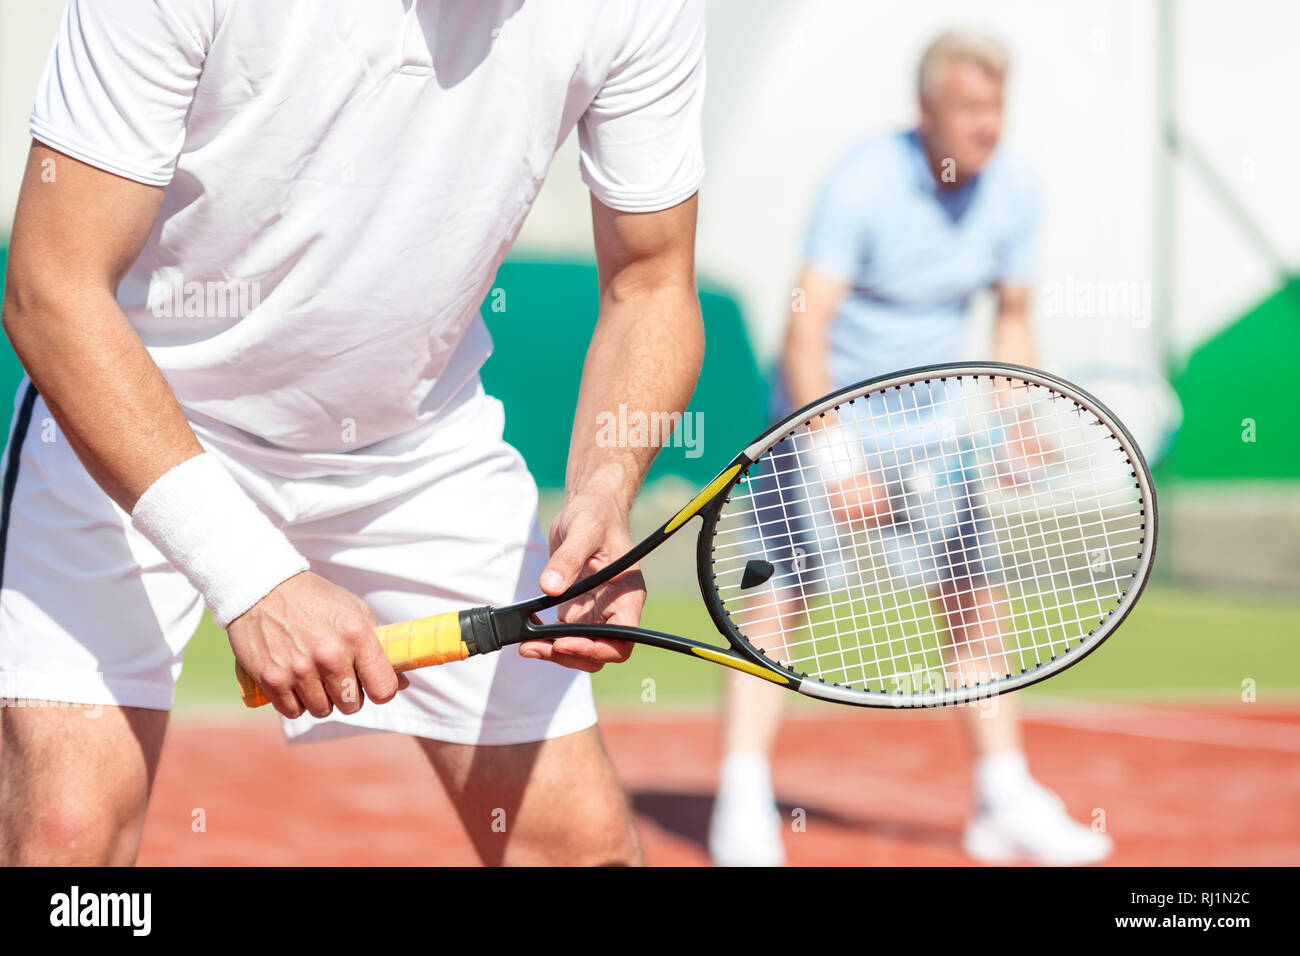 Midsection of man standing with tennis racket against friend playing doubles match on court Stock Photo